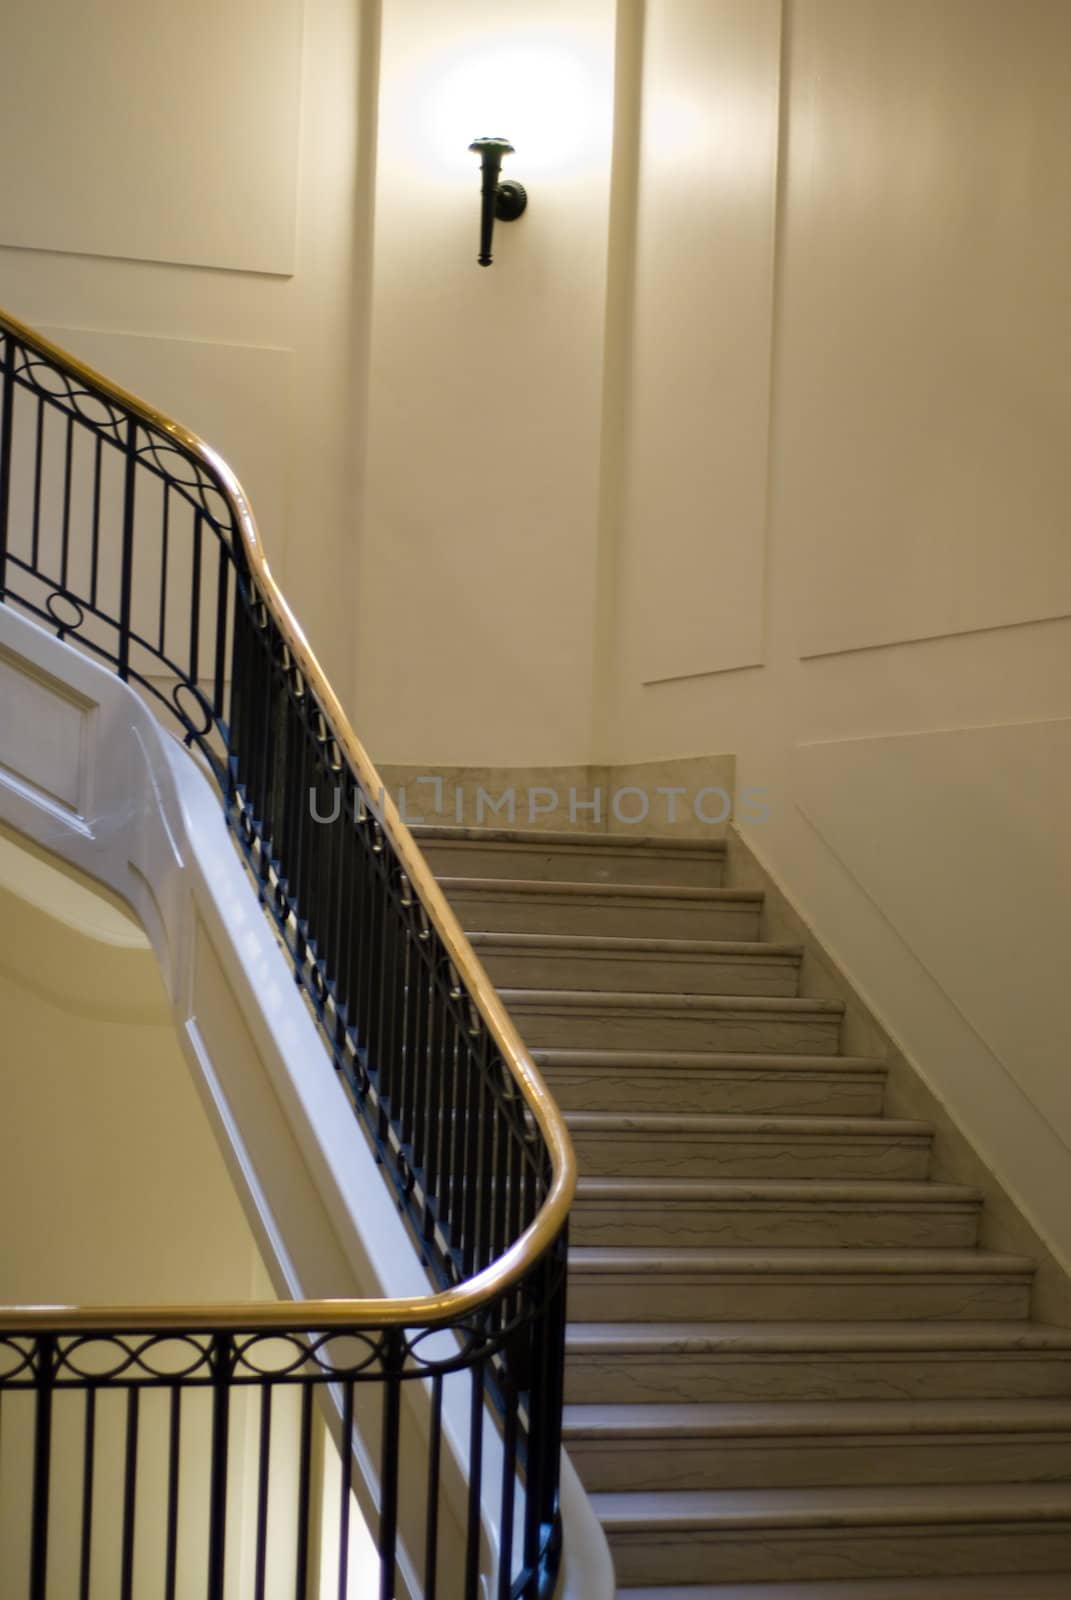 A staircase located in a fancy home